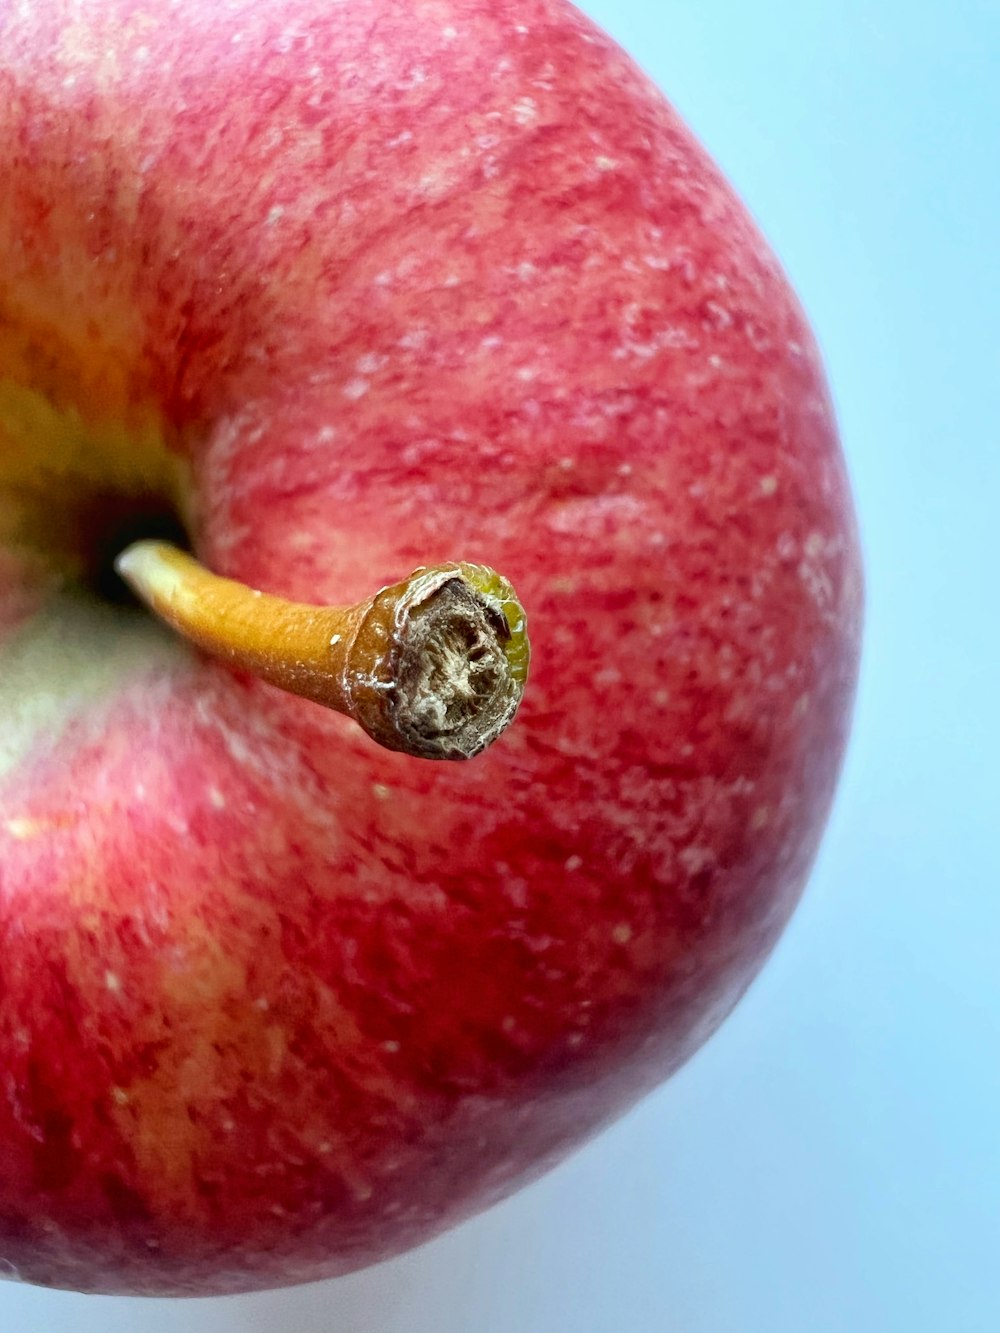 a close up of an apple with a bite taken out of it